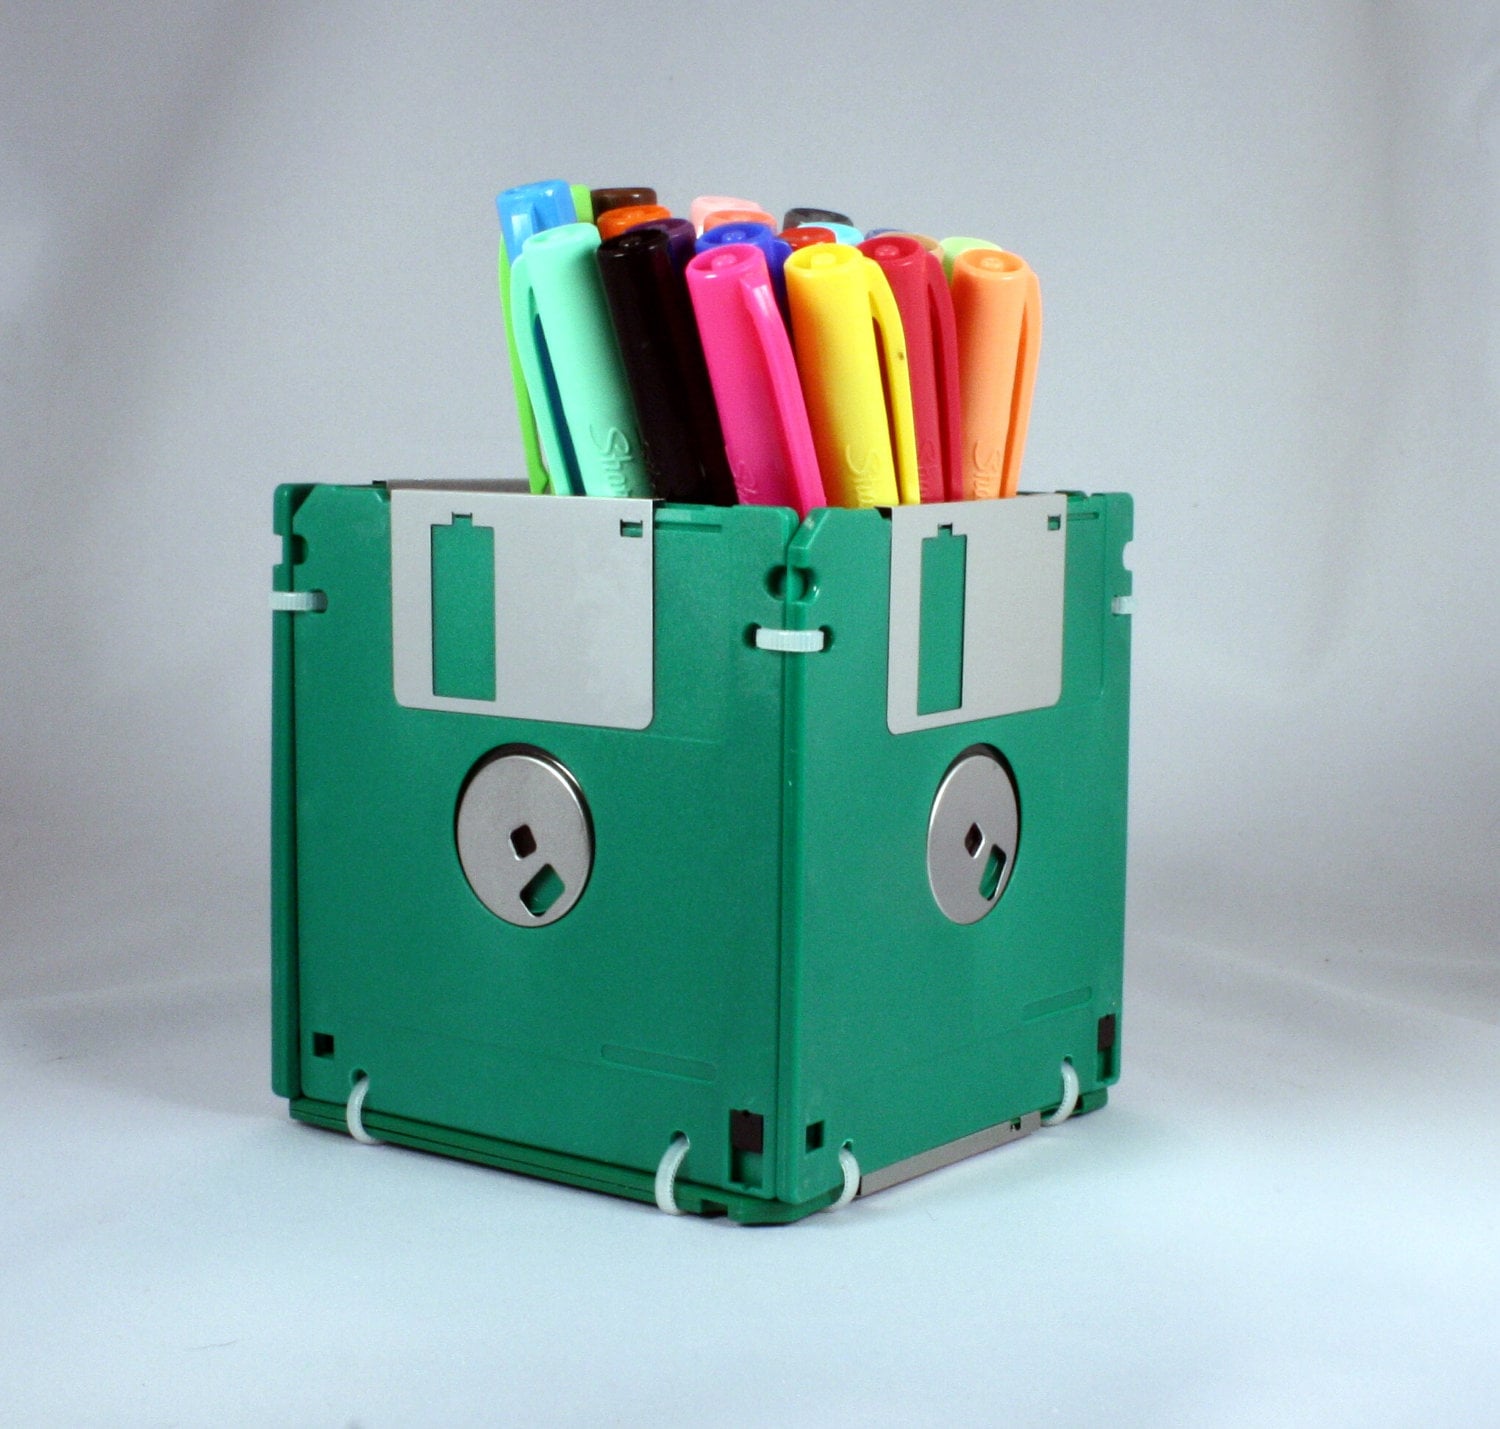 floppy disk art projects